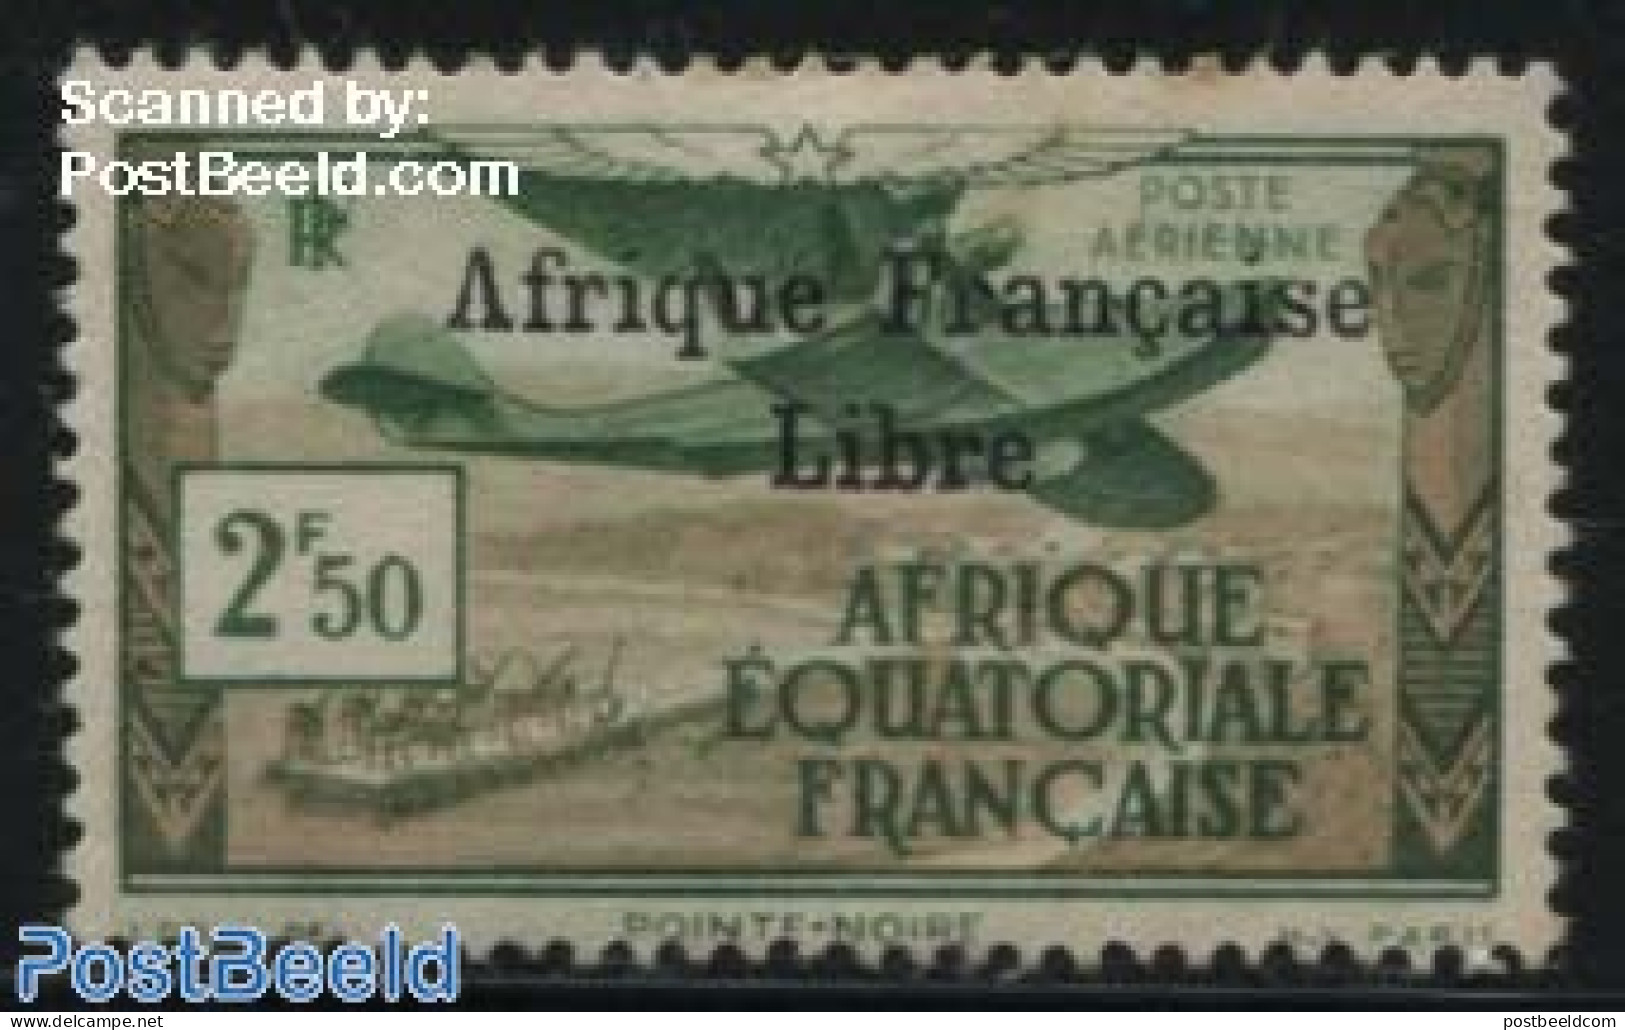 French Equatorial Africa 1940 1.50F, Stamp Out Of Set, Mint NH, Transport - Aircraft & Aviation - Unused Stamps